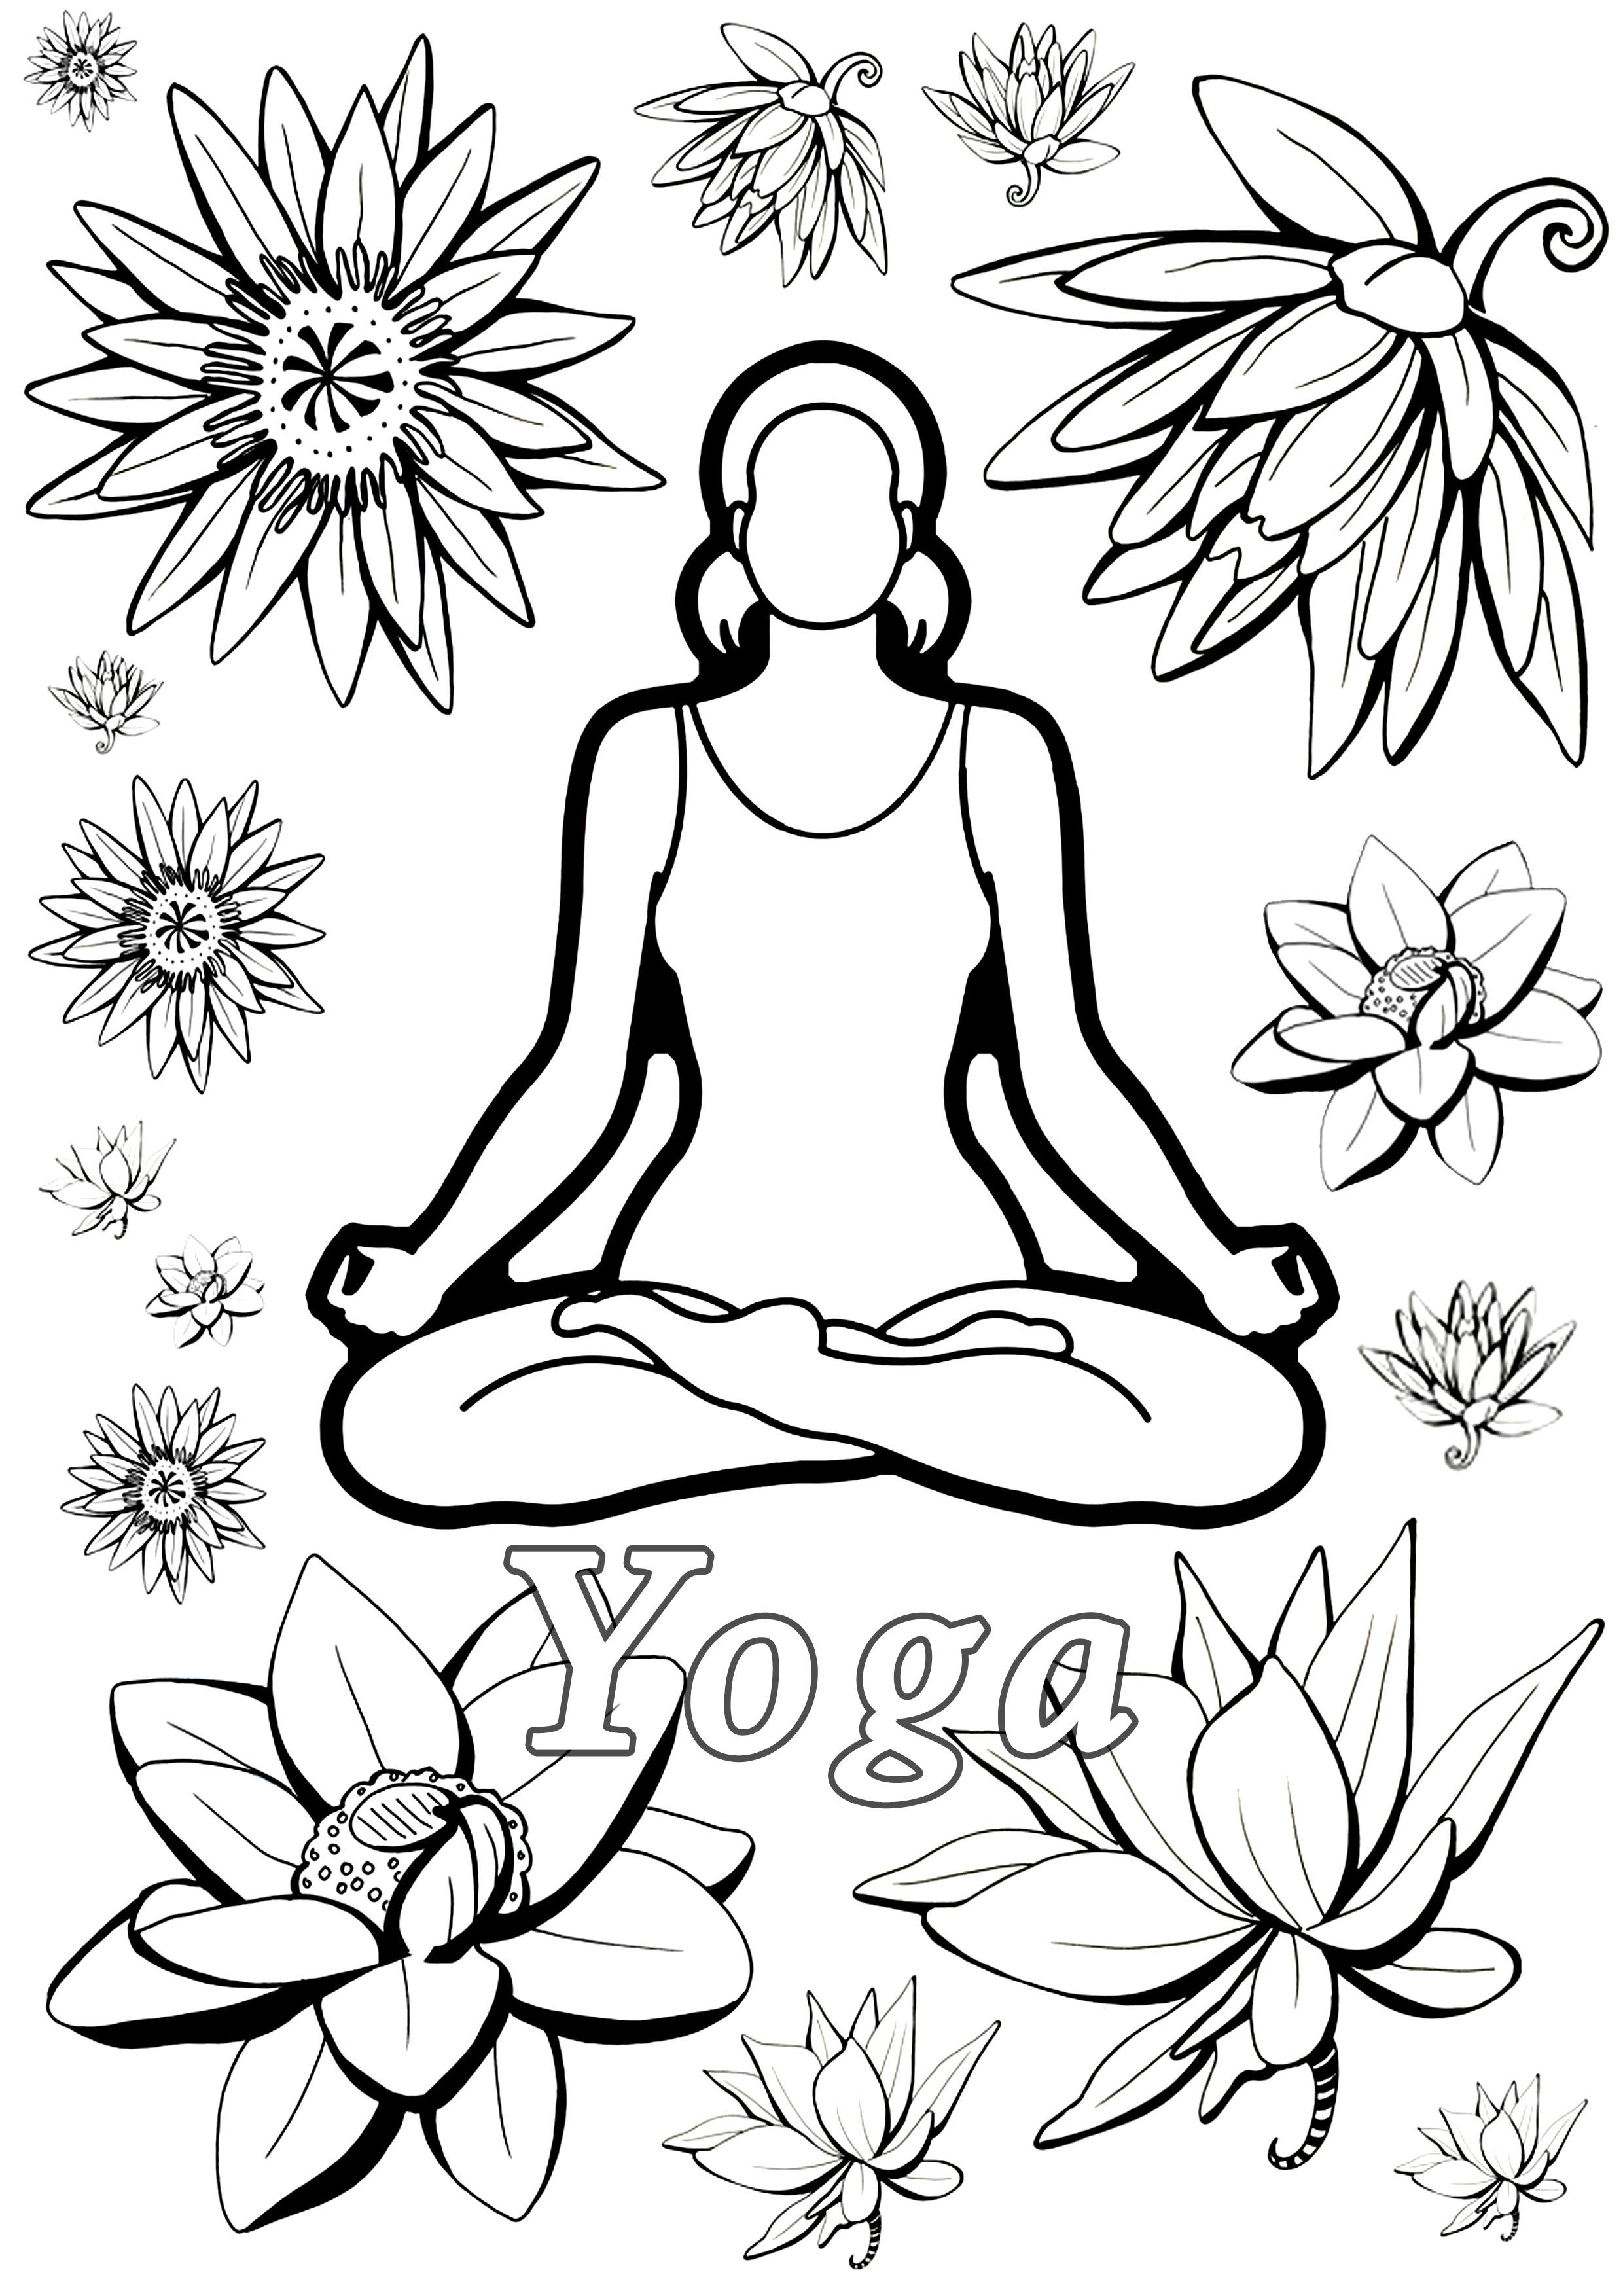 Keep calm and do Yoga  Anti stress Adult Coloring Pages